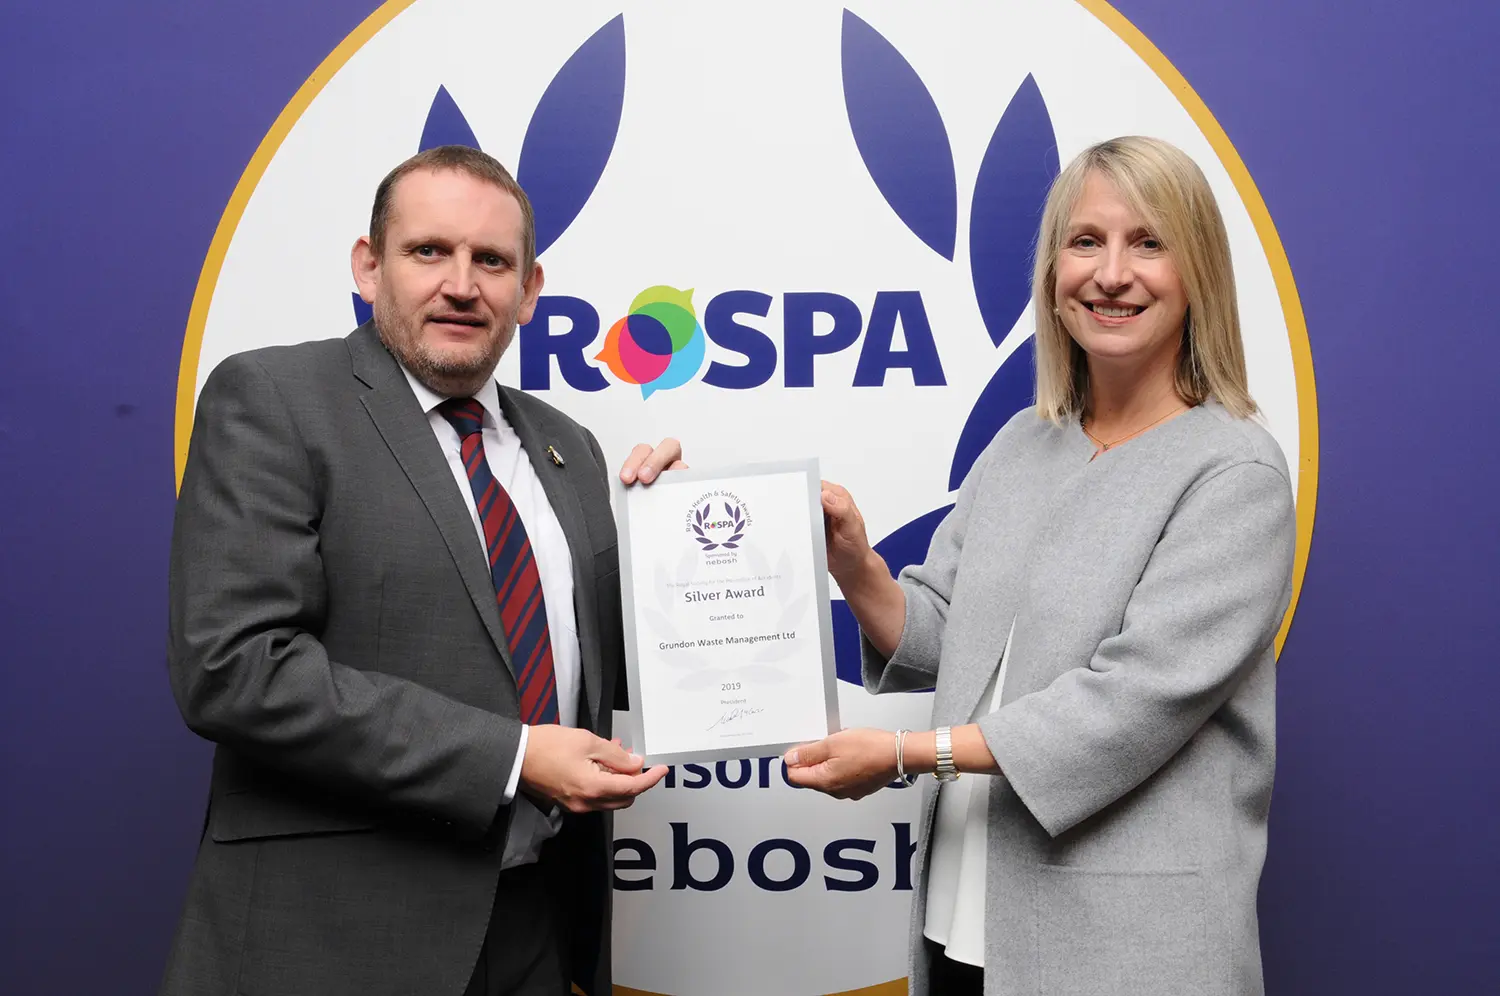 Reg Hodson, SHEQ Manager at Grundon Waste Management, collects the Silver Award from Jocelyn McNulty, RoSPA Trustee, at the RoSPA 2019 Awards